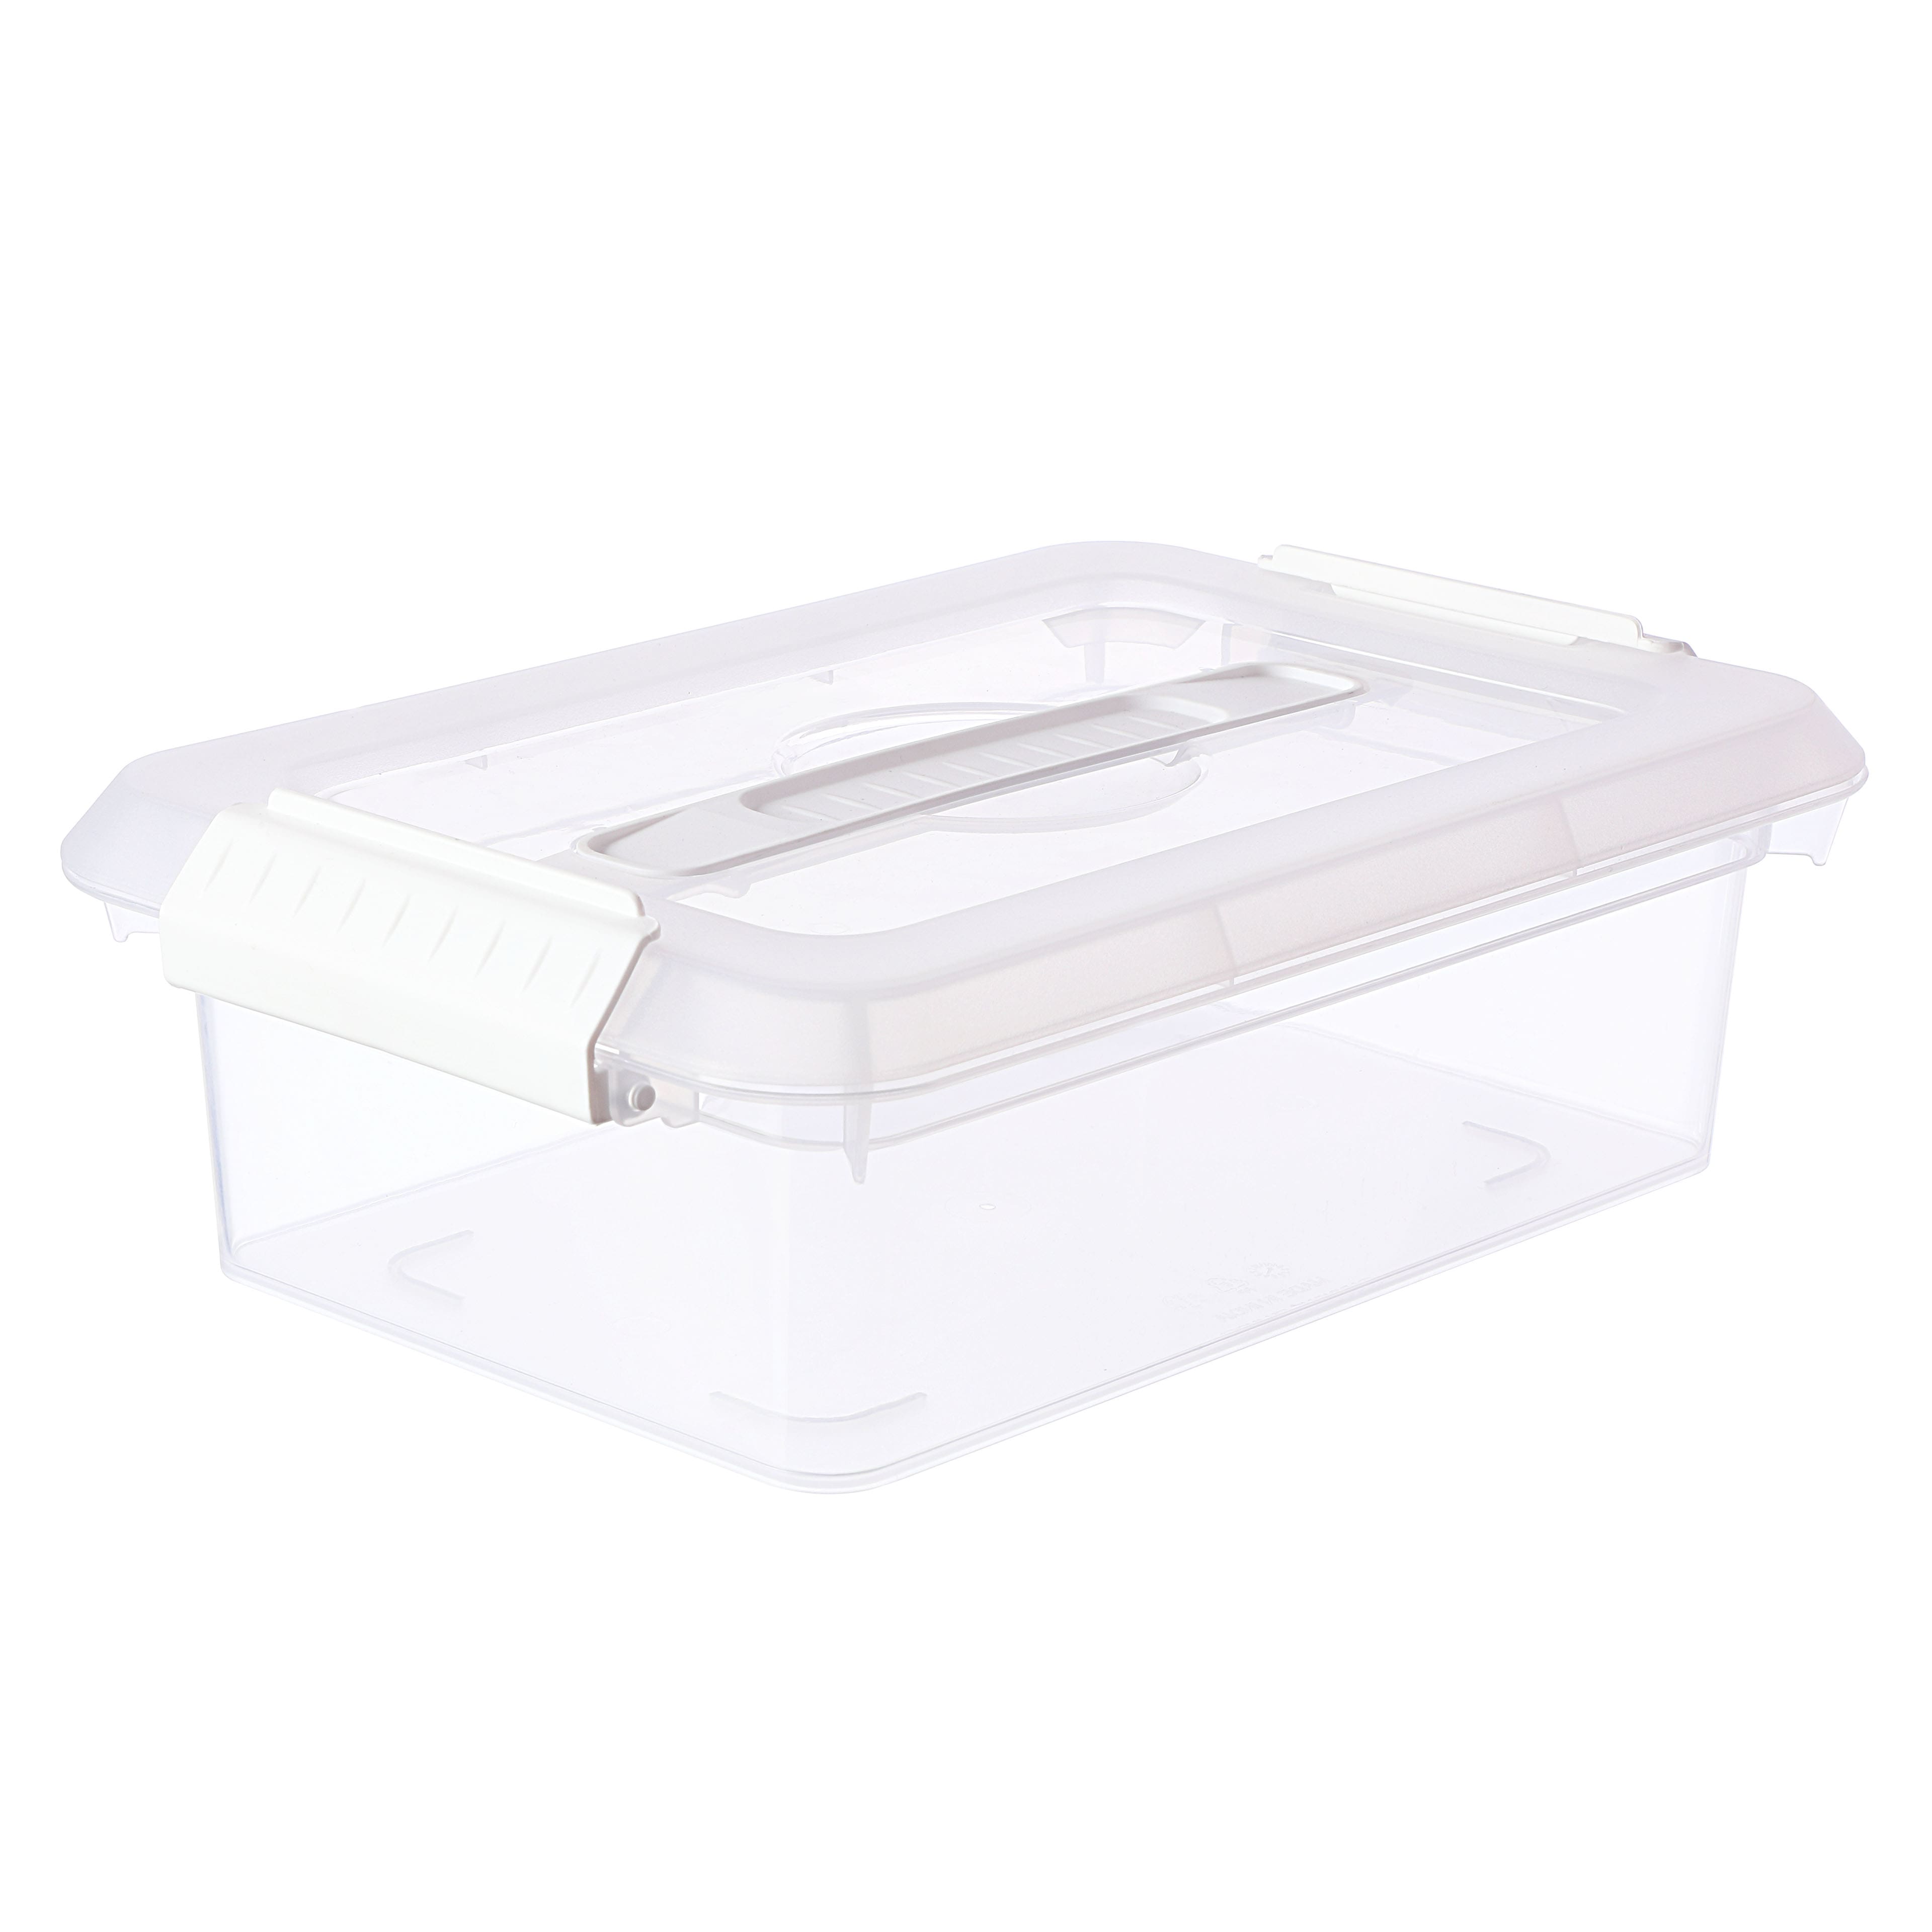 Storex Plastic Cubby Bins Small Size 5 28 x 7 1316 x 12 216 Crystal Clear  Carton Of 5 - Office Depot